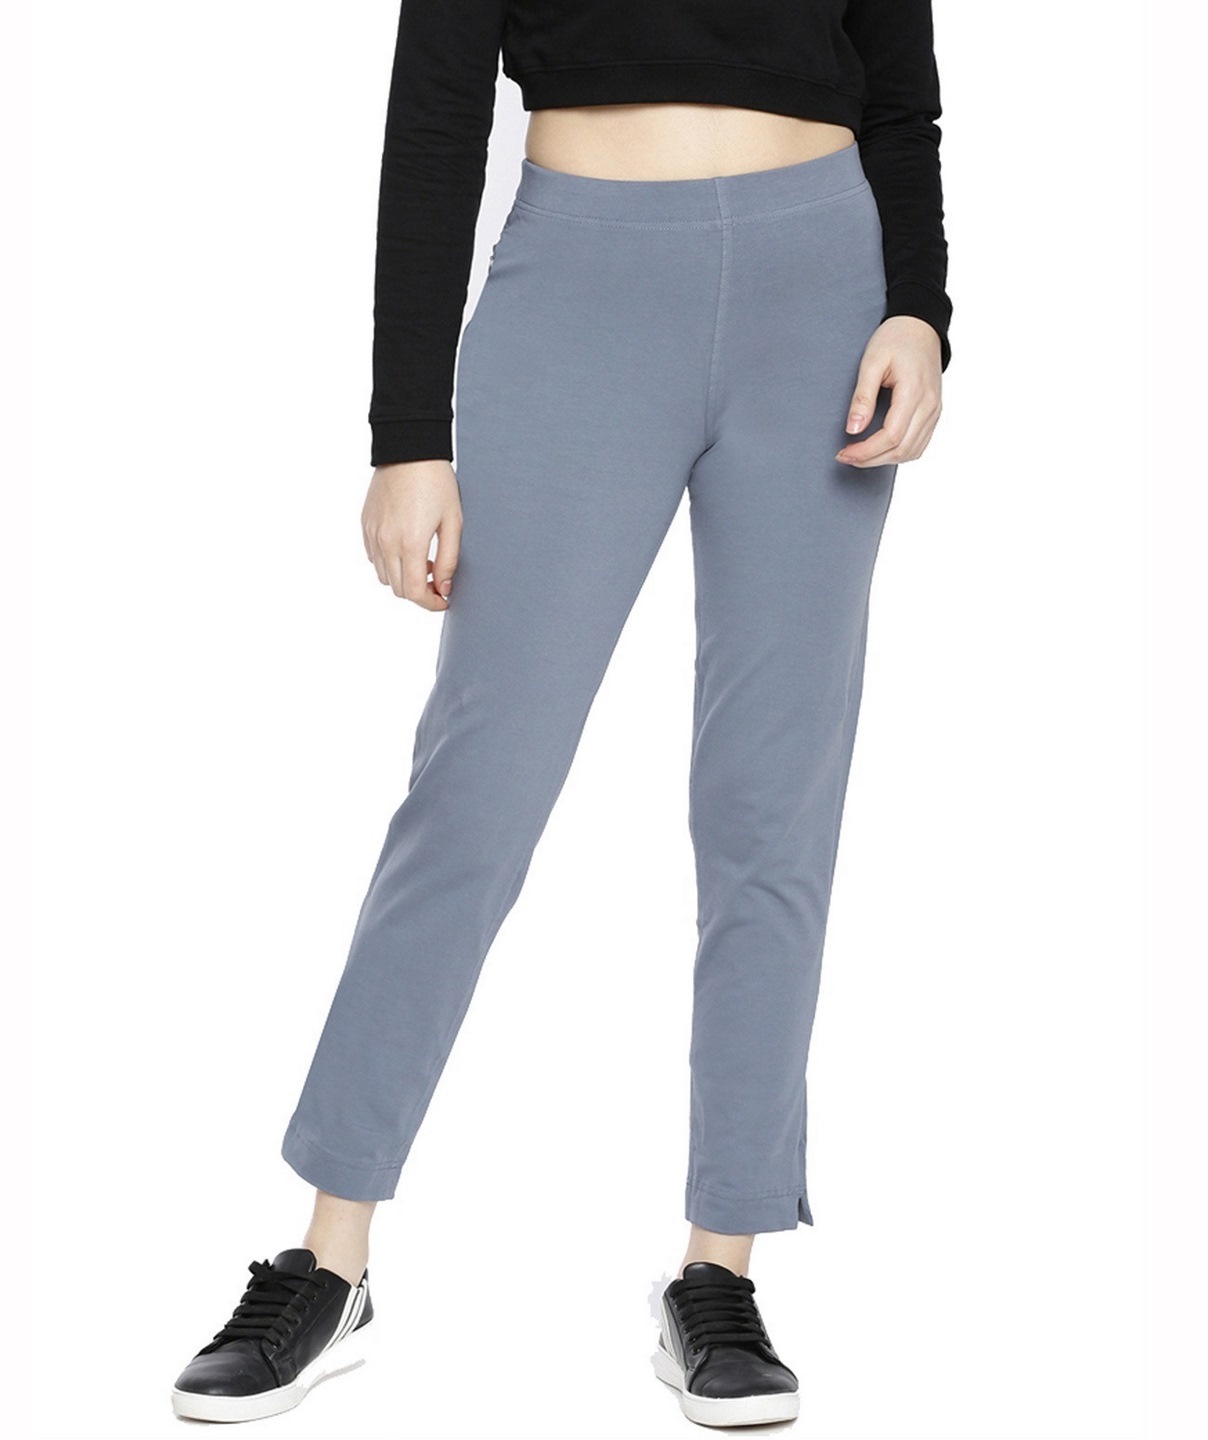 Discover 130+ womens grey cigarette trousers